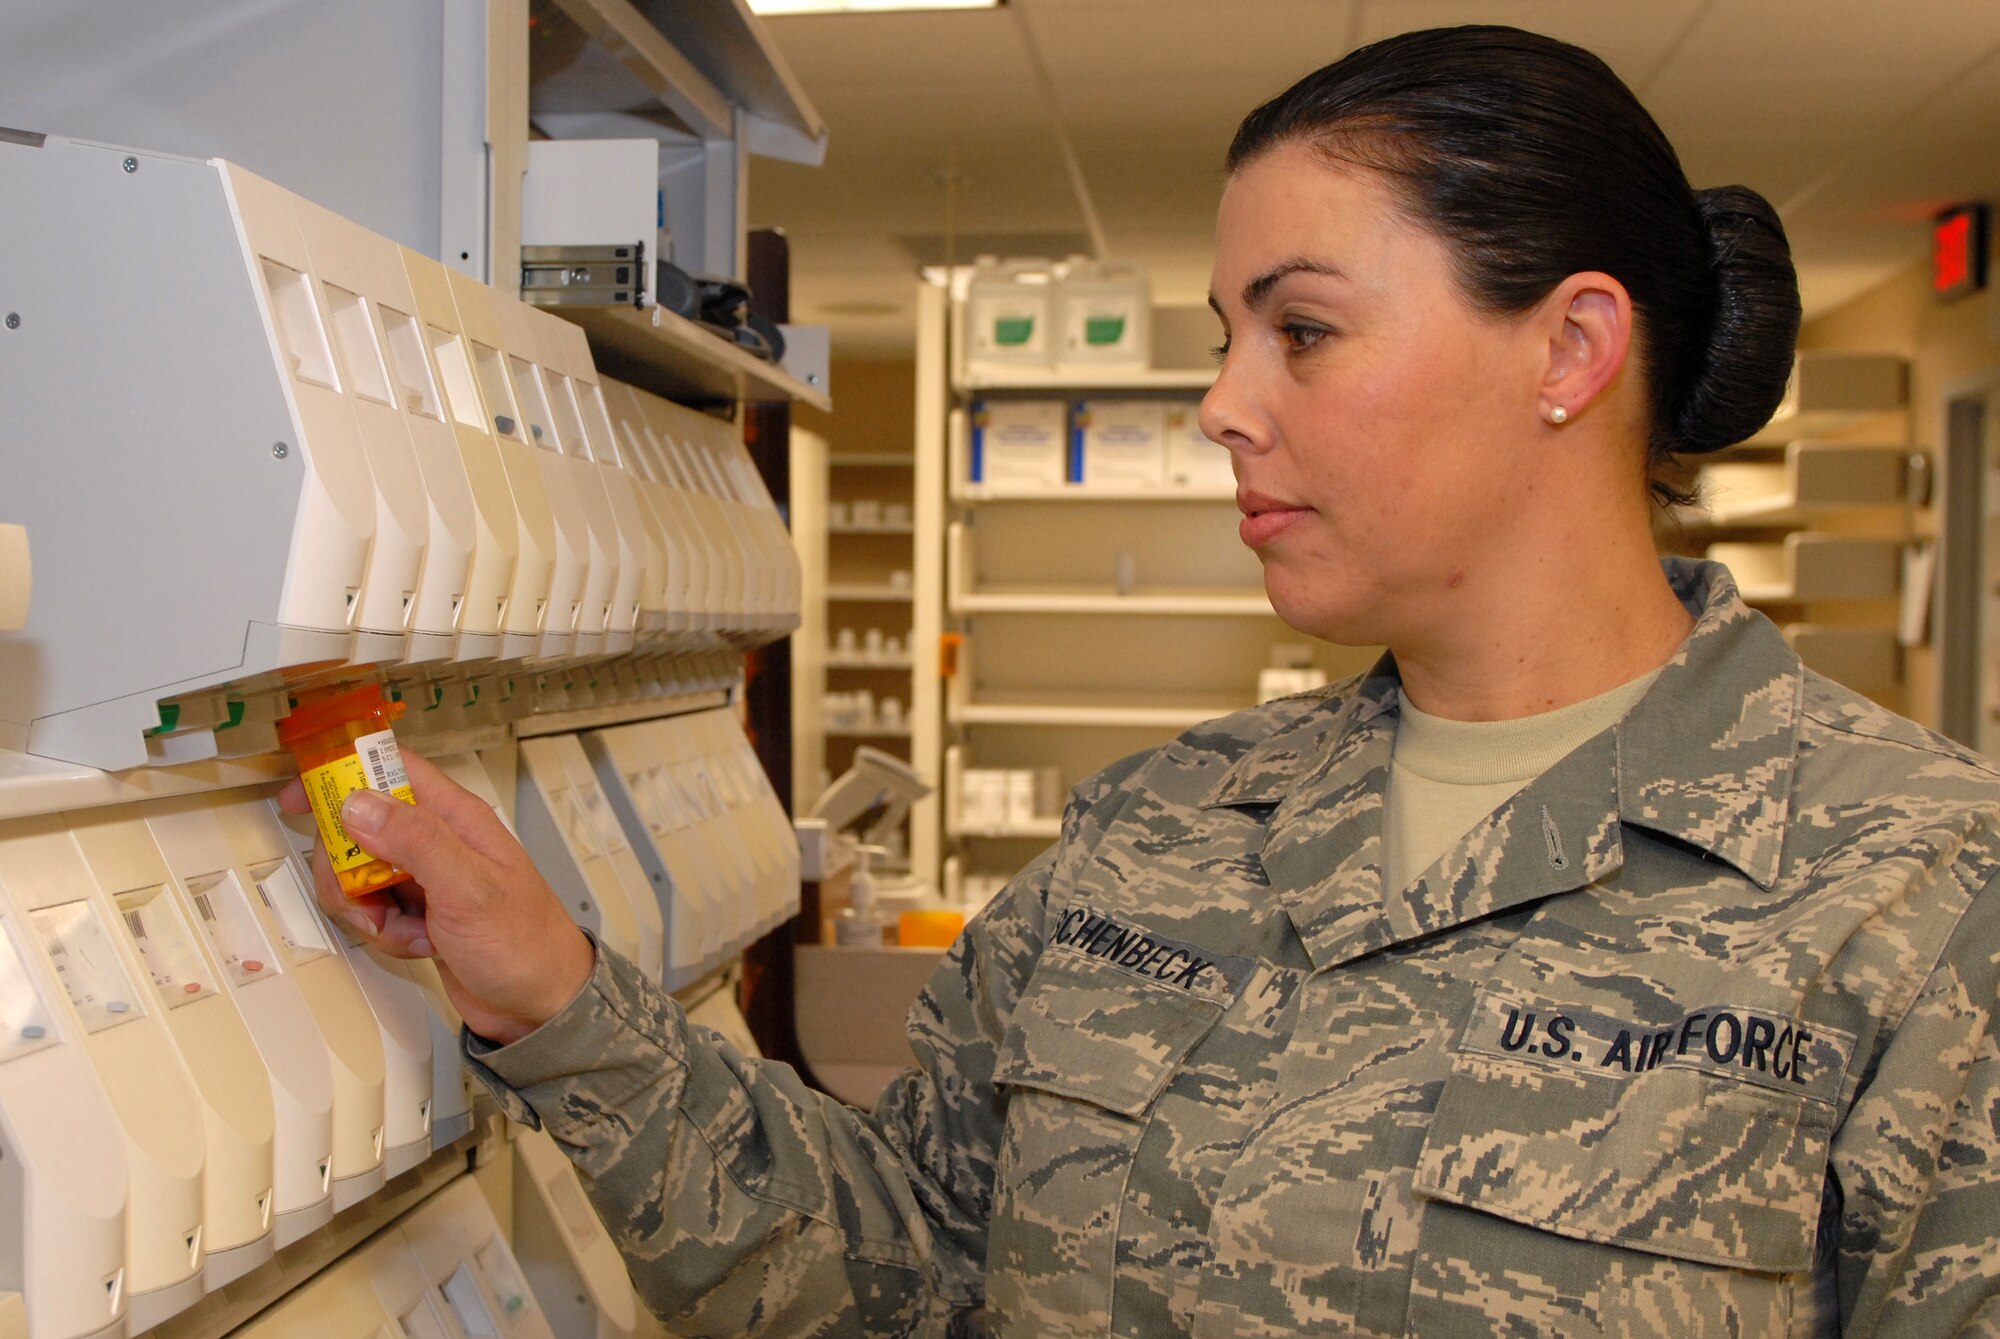 Master Sgt. Amber Aschenbeck, 19th Medical Support Squadron pharmacy flight chief, fills a prescription at the pharmacy June 4 on base. Sergeant Aschenbeck was vital to managing a pharmacy renovation that provides better customer service to patients seen at the 19th Medical Group. (U.S. Air Force photo by Senior Airman Steele C. G. Britton)